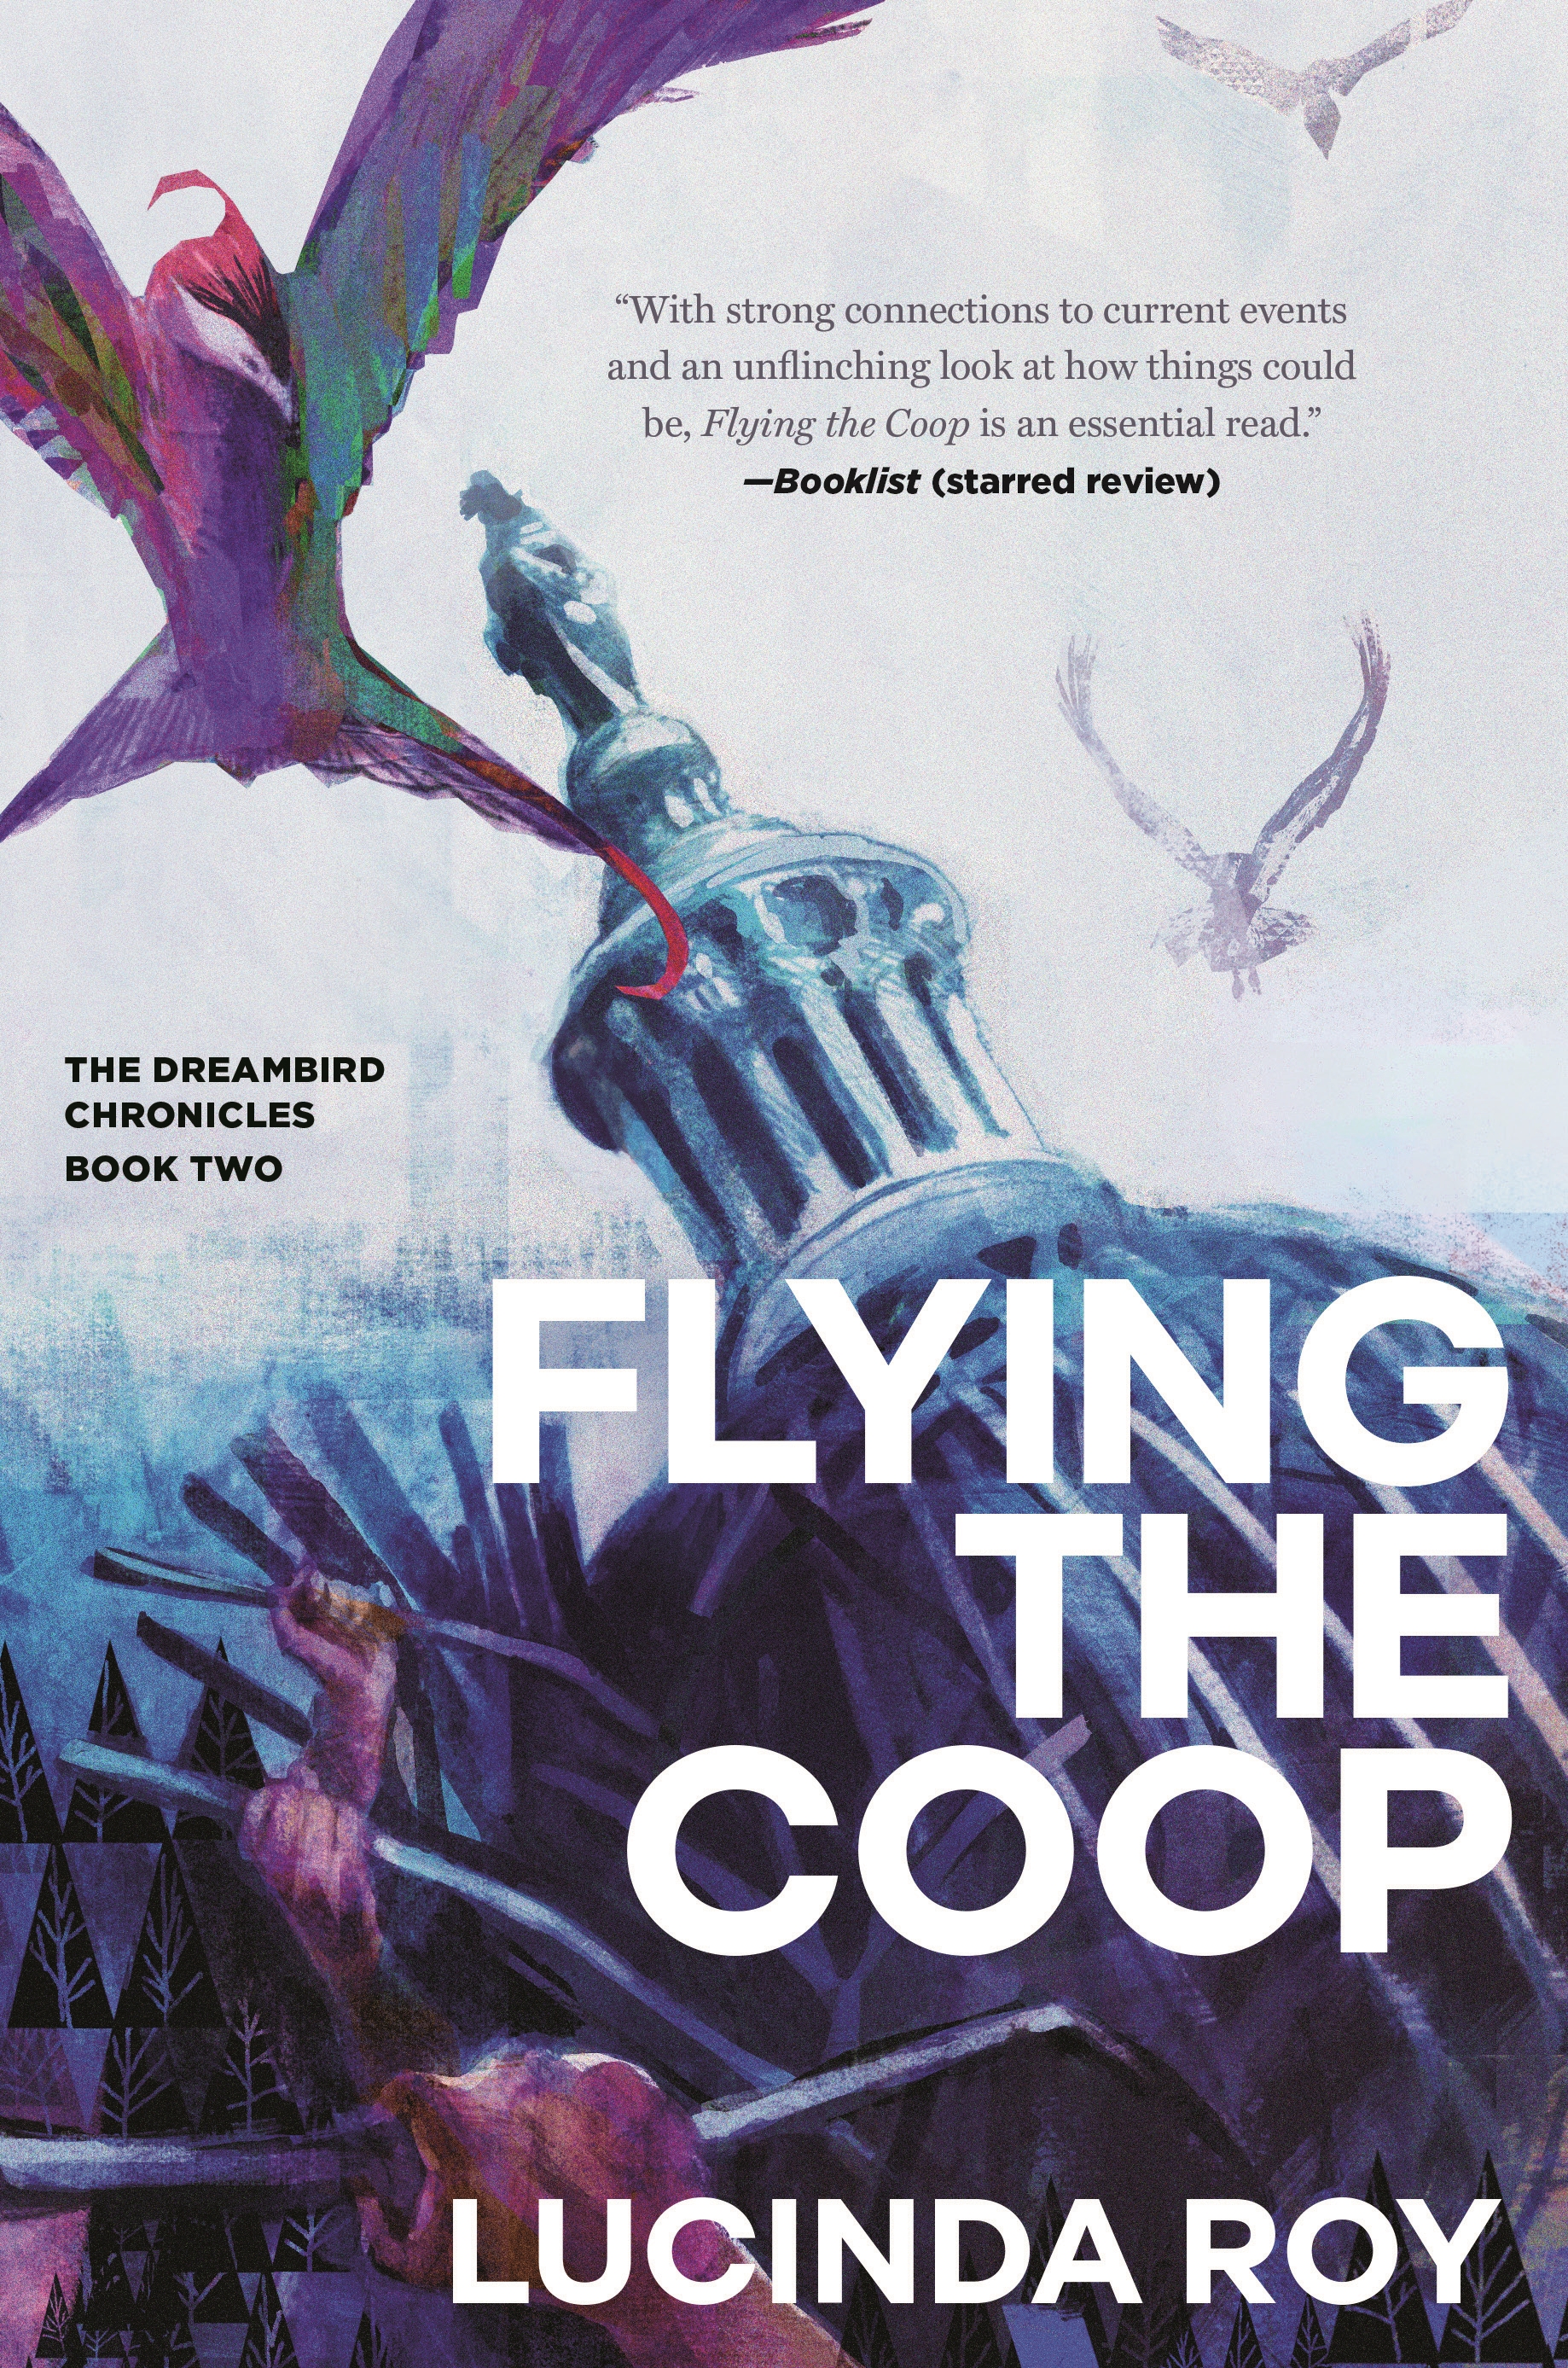 Flying the Coop : The Dreambird Chronicles, Book Two by Lucinda Roy